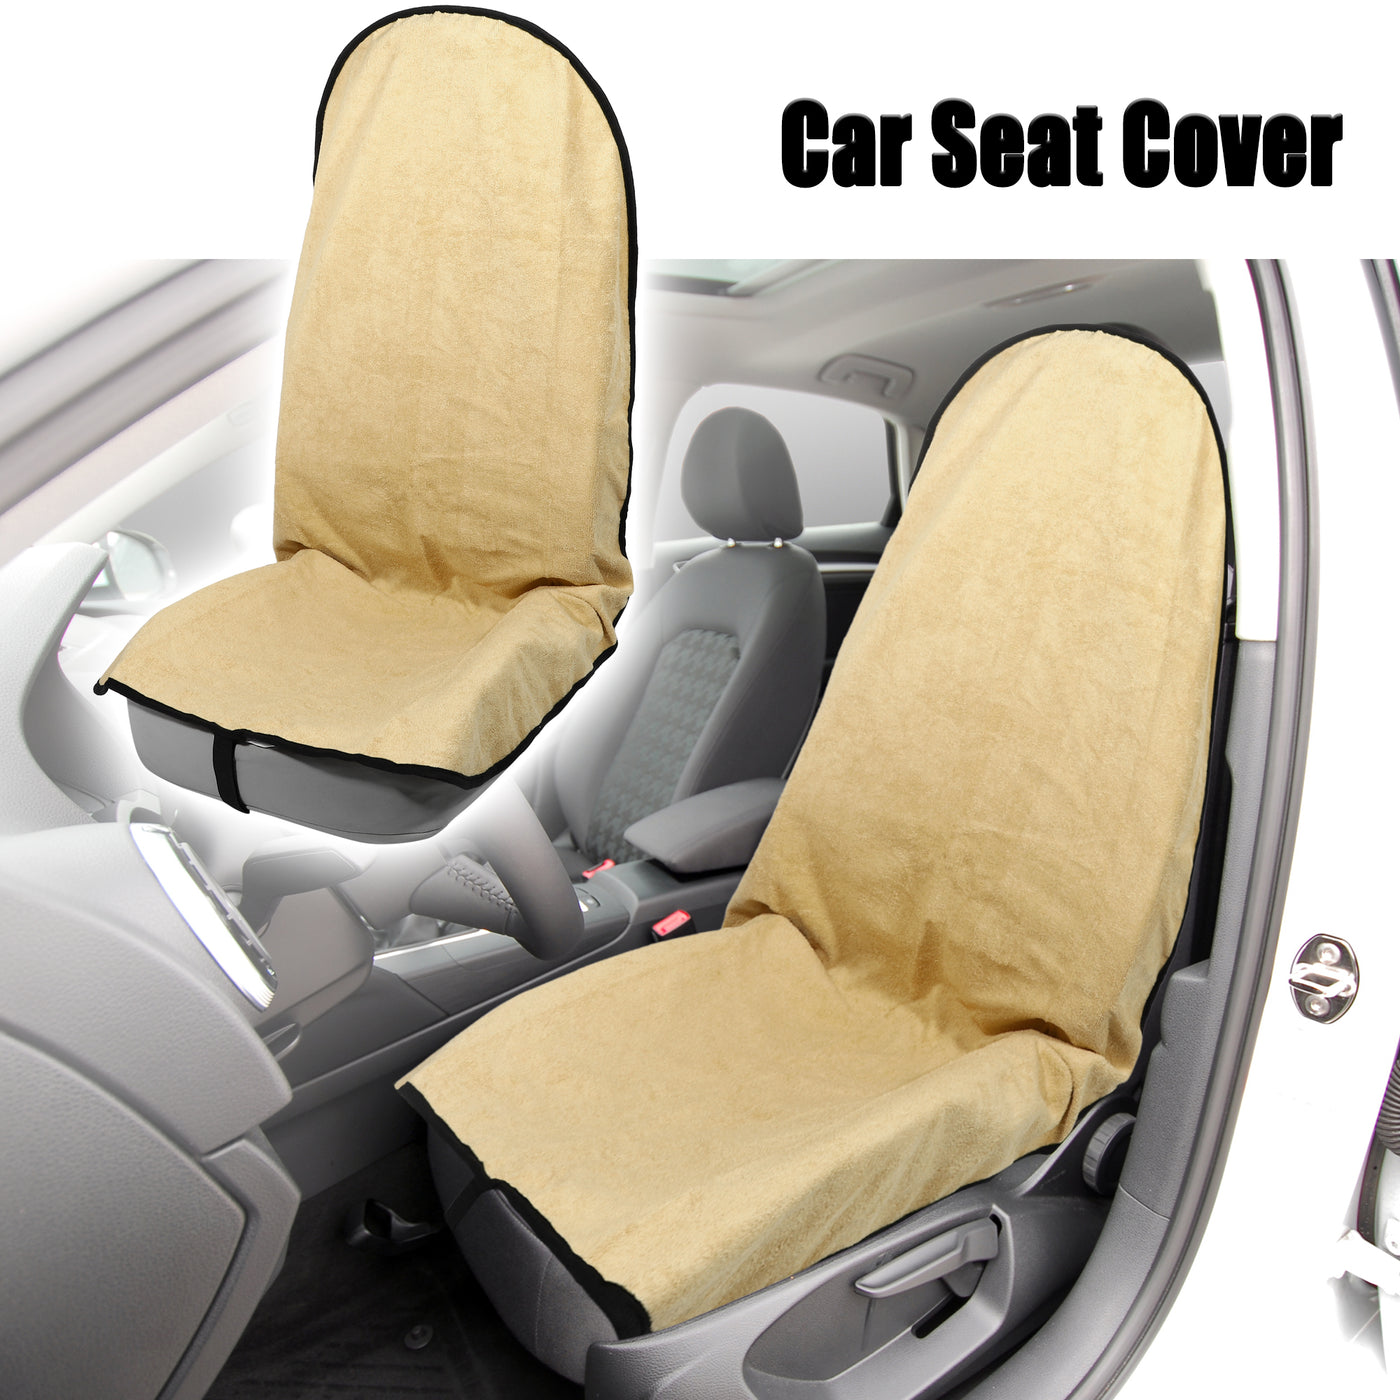 X AUTOHAUX Beige Universal Car Seat Cover Anti-Slip Towel Seat Protector Pad for Car Trucks SUV